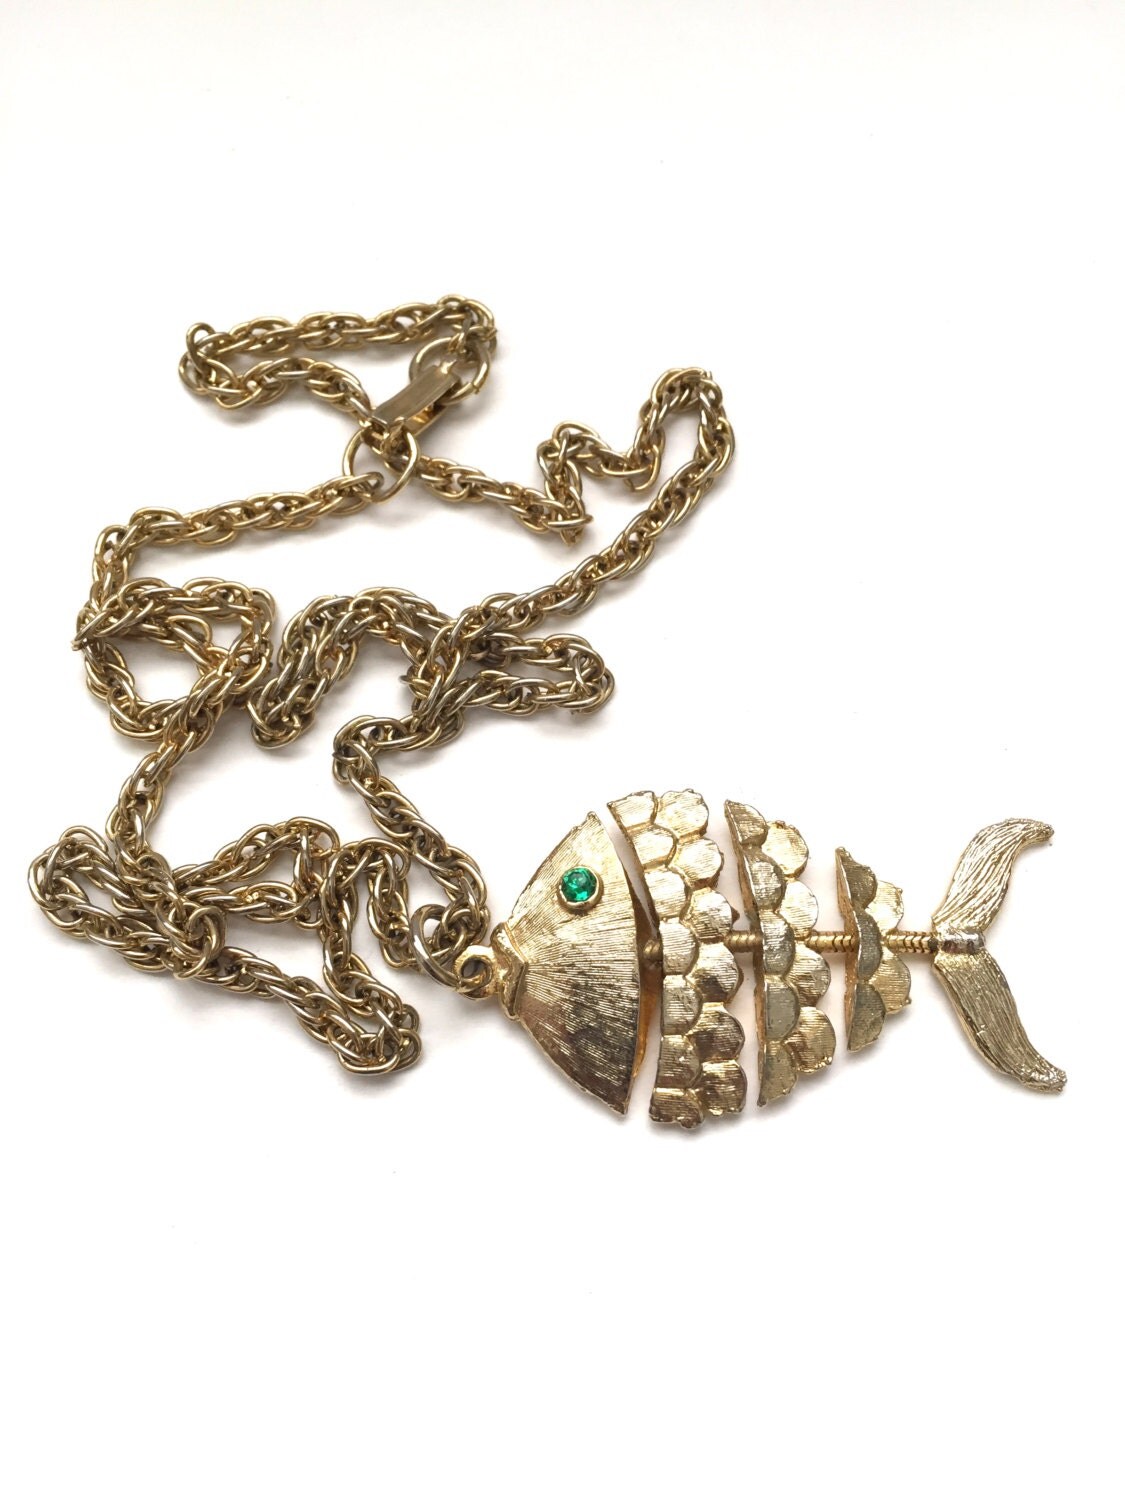 Vintage Sixties Articulated Fish Pendant by thayerstreetvintage